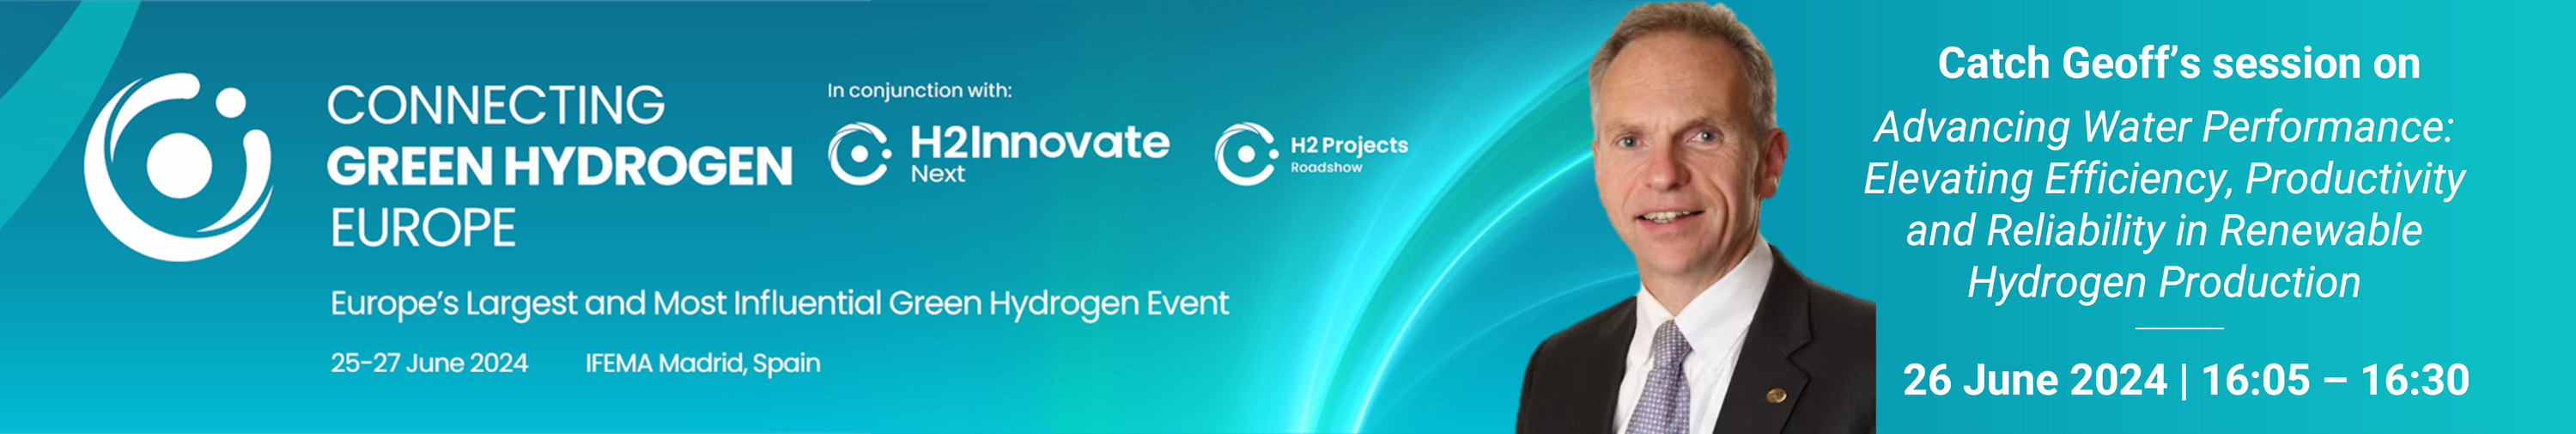 A banner of the hydrogen event with information on it 